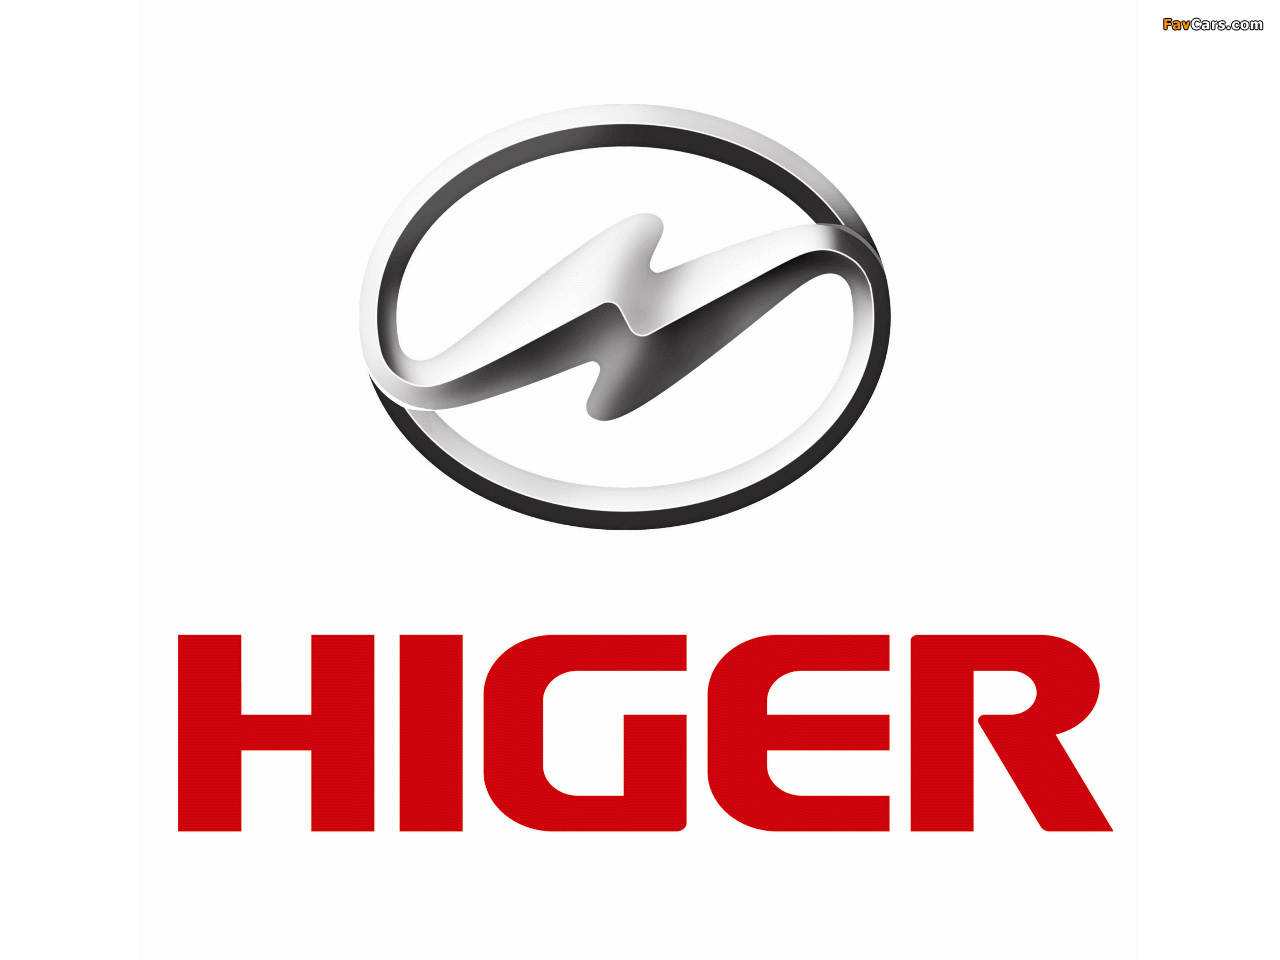 Images of Higer (1280 x 960)